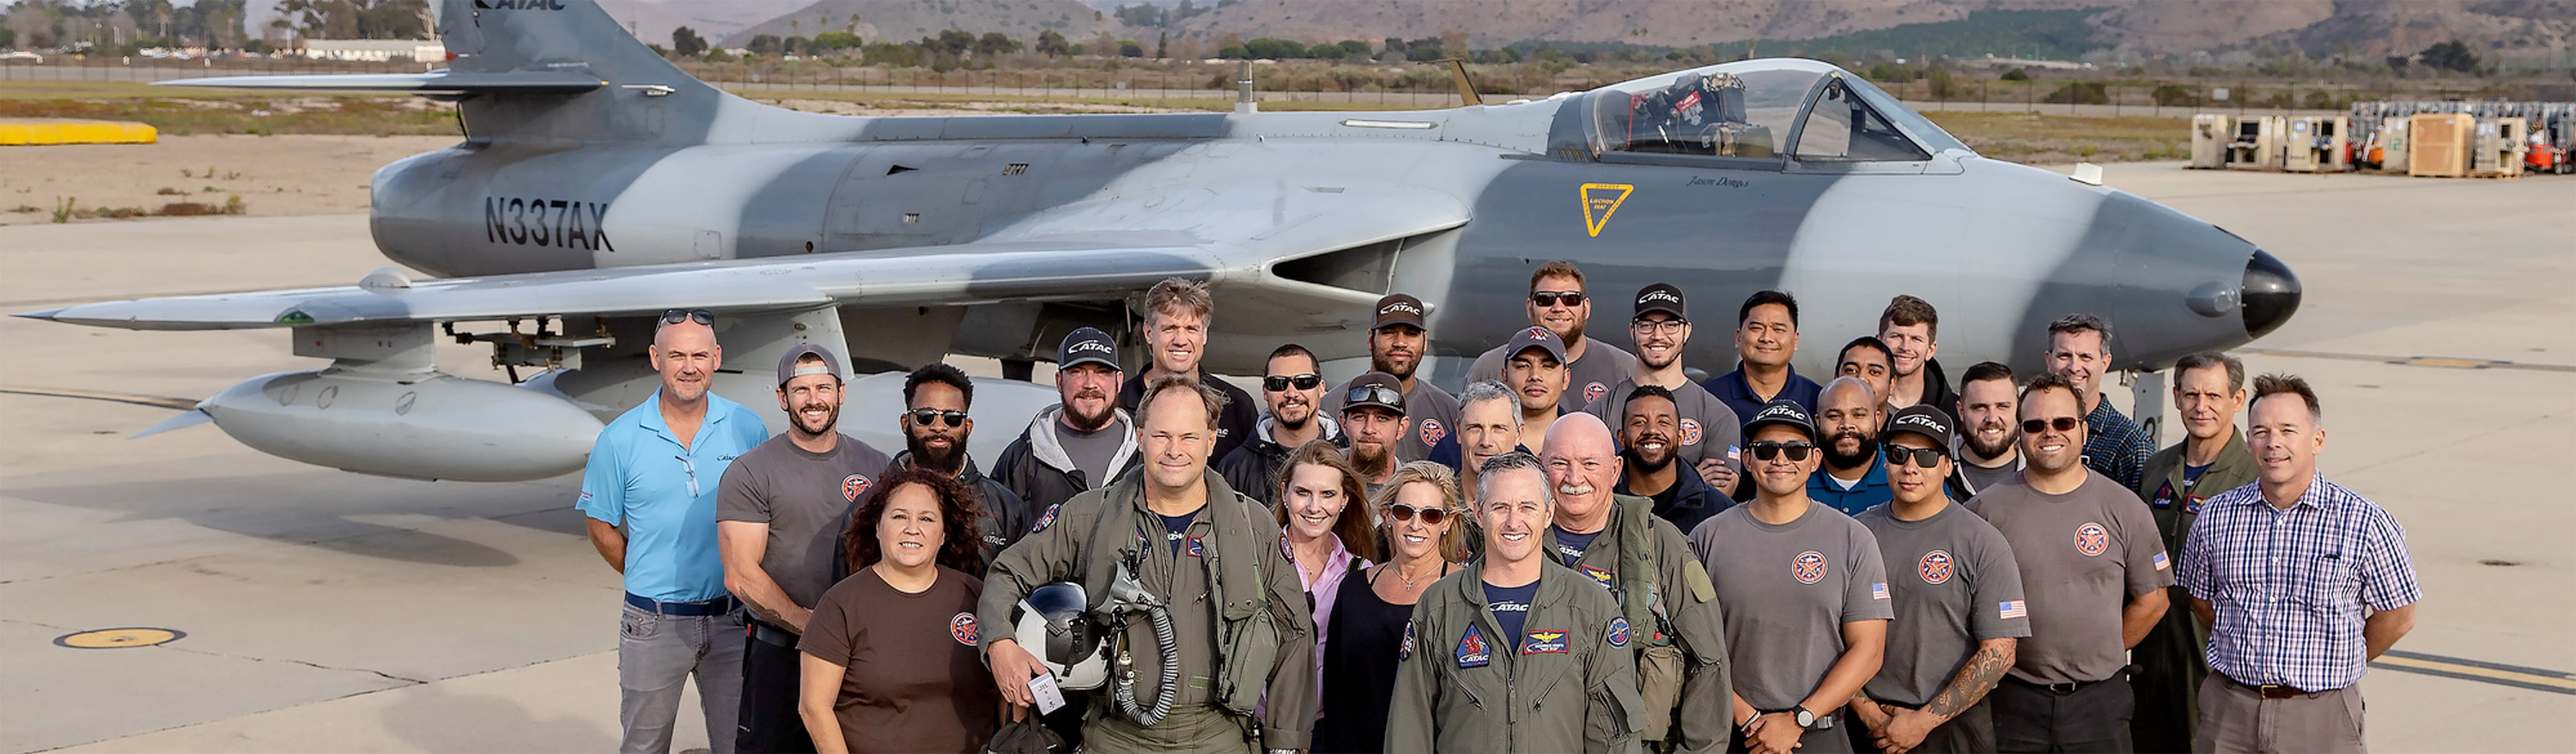 ATAC Team members in front of a ATAC fighter plane.